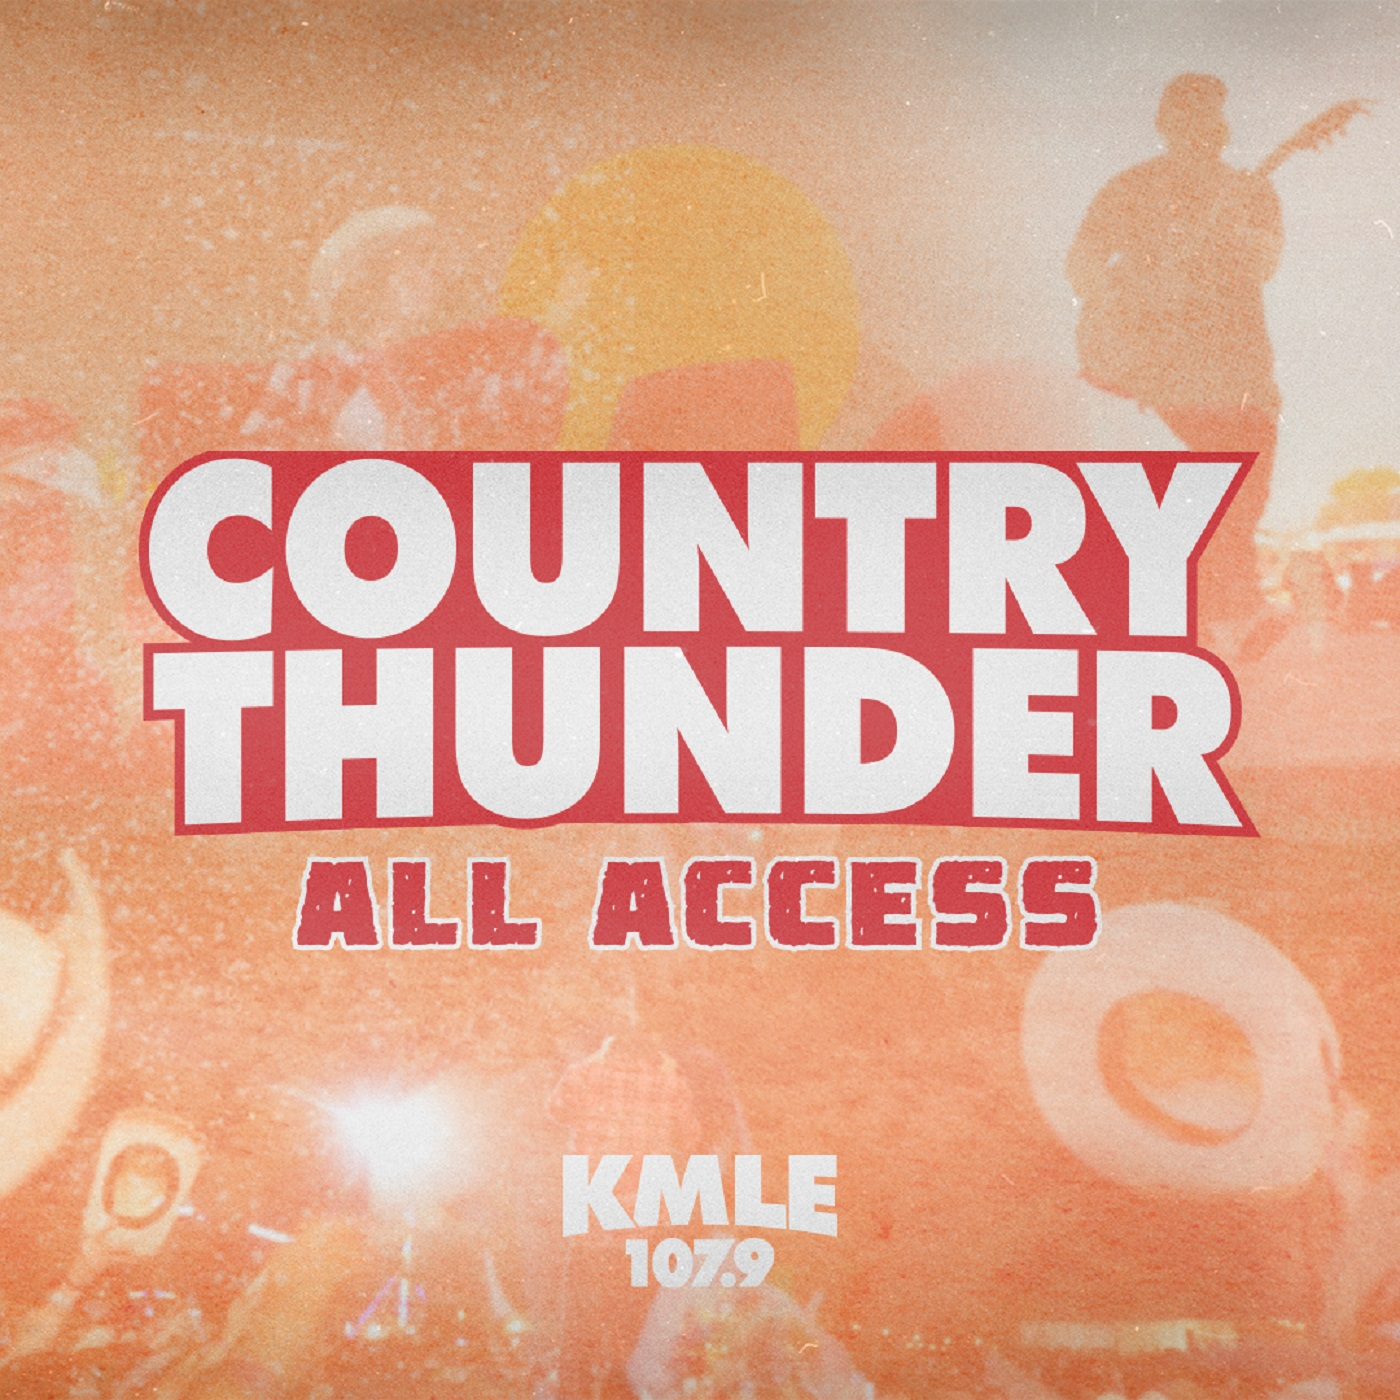 Country Thunder All Access: Day 1 Featuring Jon Pardi, Midland & More!